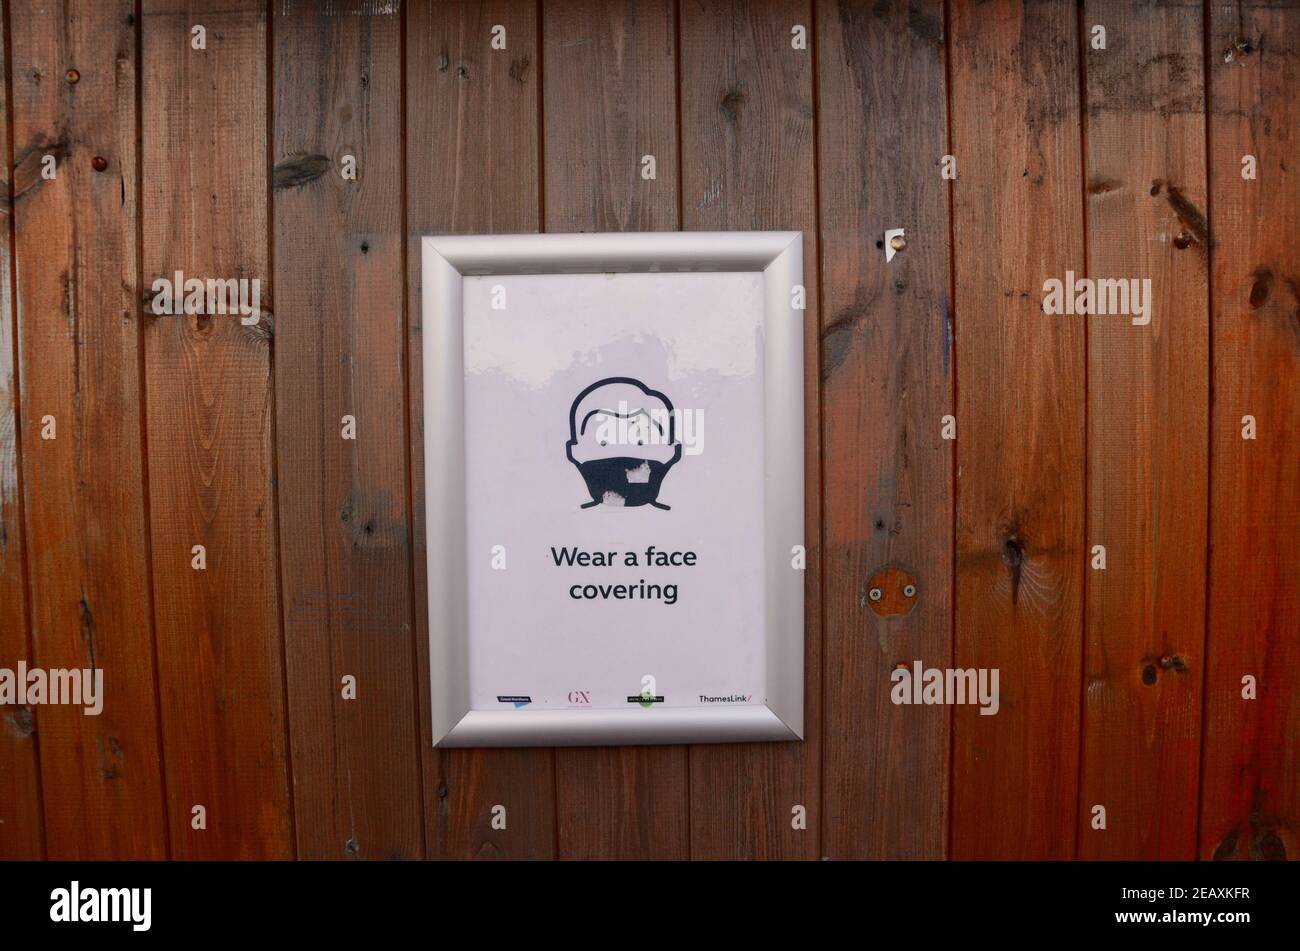 a wear a face covering framed poster on a station wall haringey london england uk Stock Photo